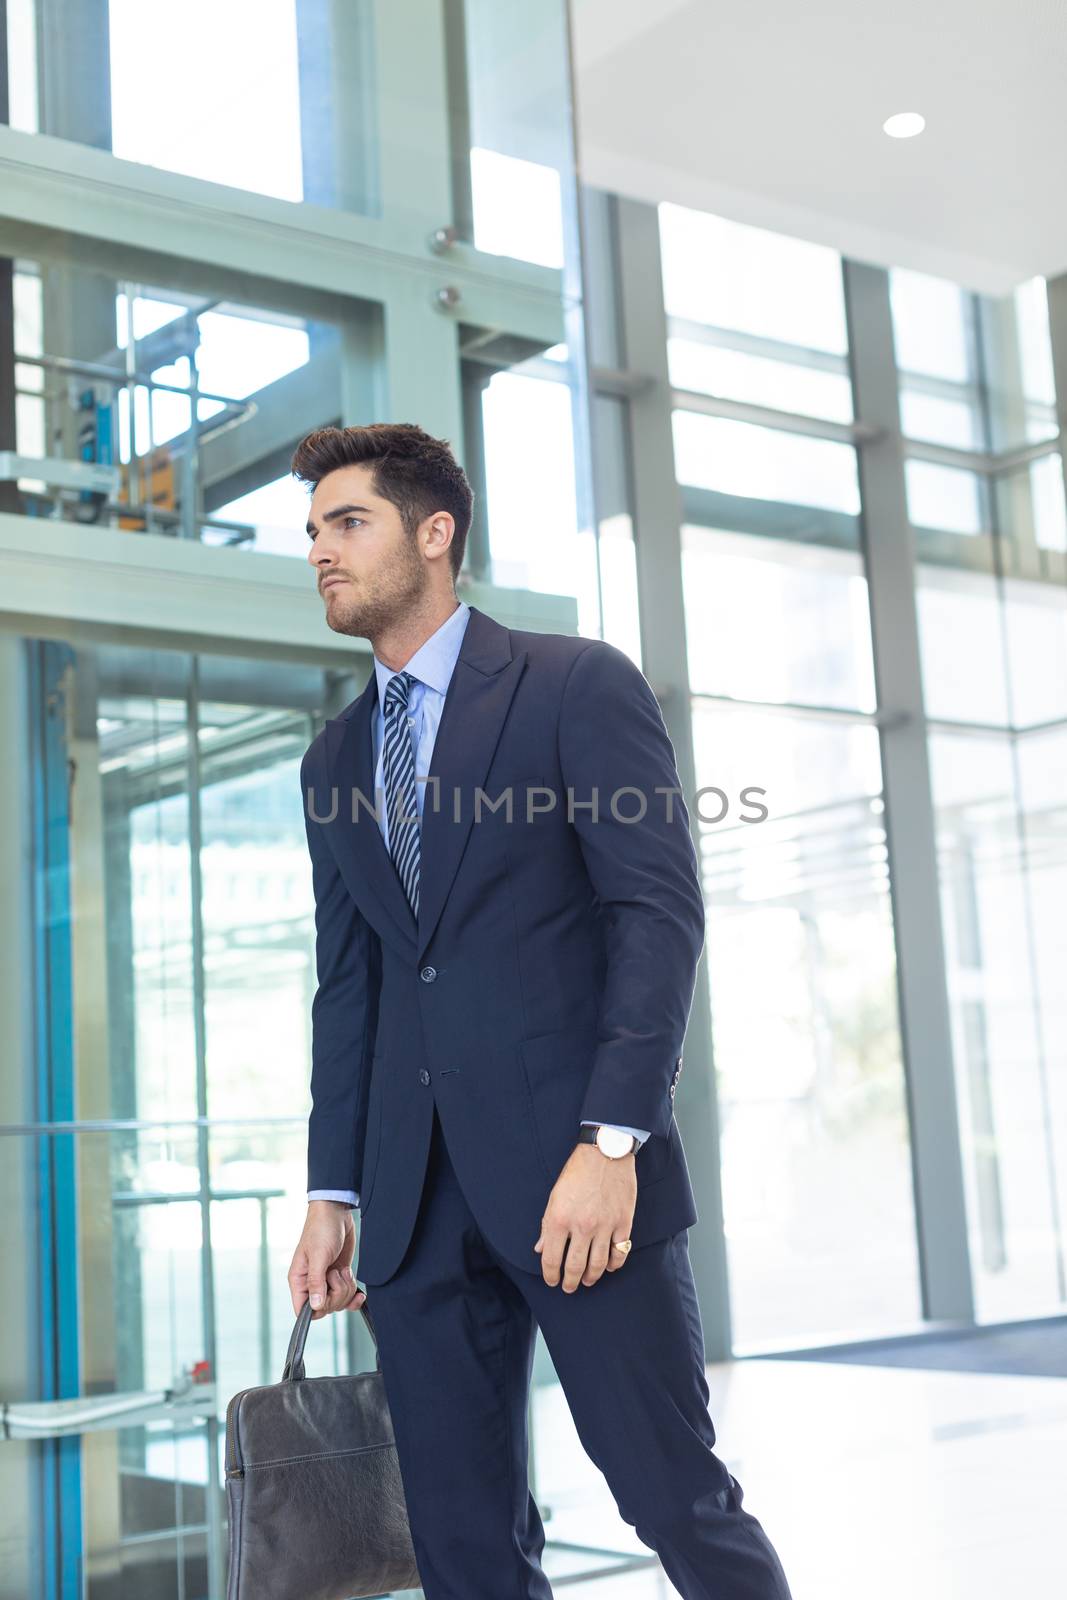 Low angle view of young Caucasian businessman smiling at camera while standing in modern office